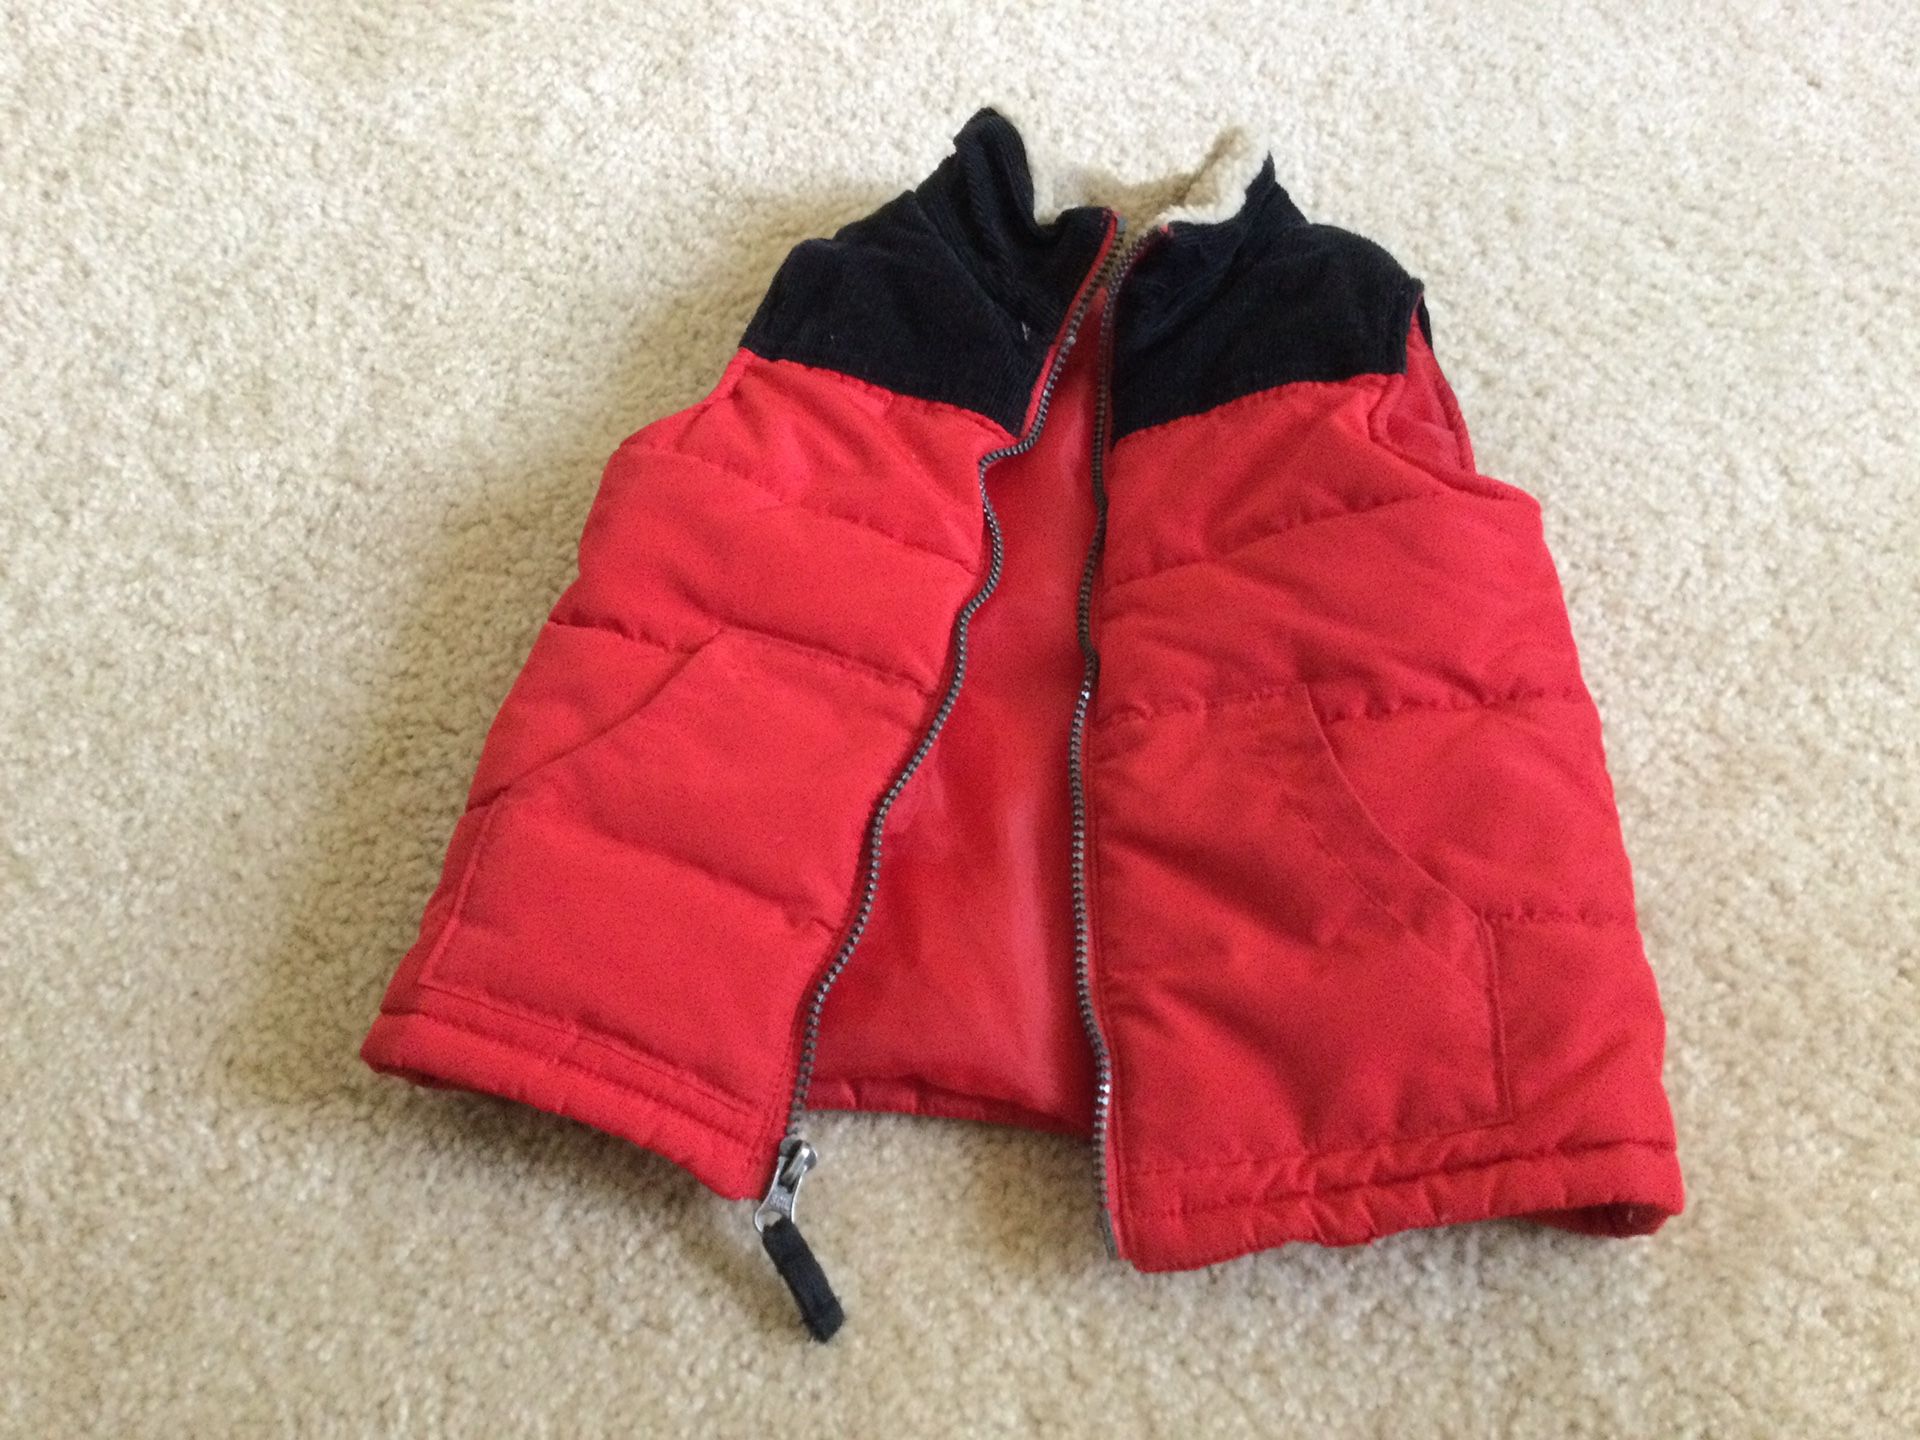 Carters 4t soft jacket for $15(bought for $36);Nautica 3t fleece jacket for $5;Under armor hoodie size5 for $8;Tommy Hilfiger sweater size 5 for $10